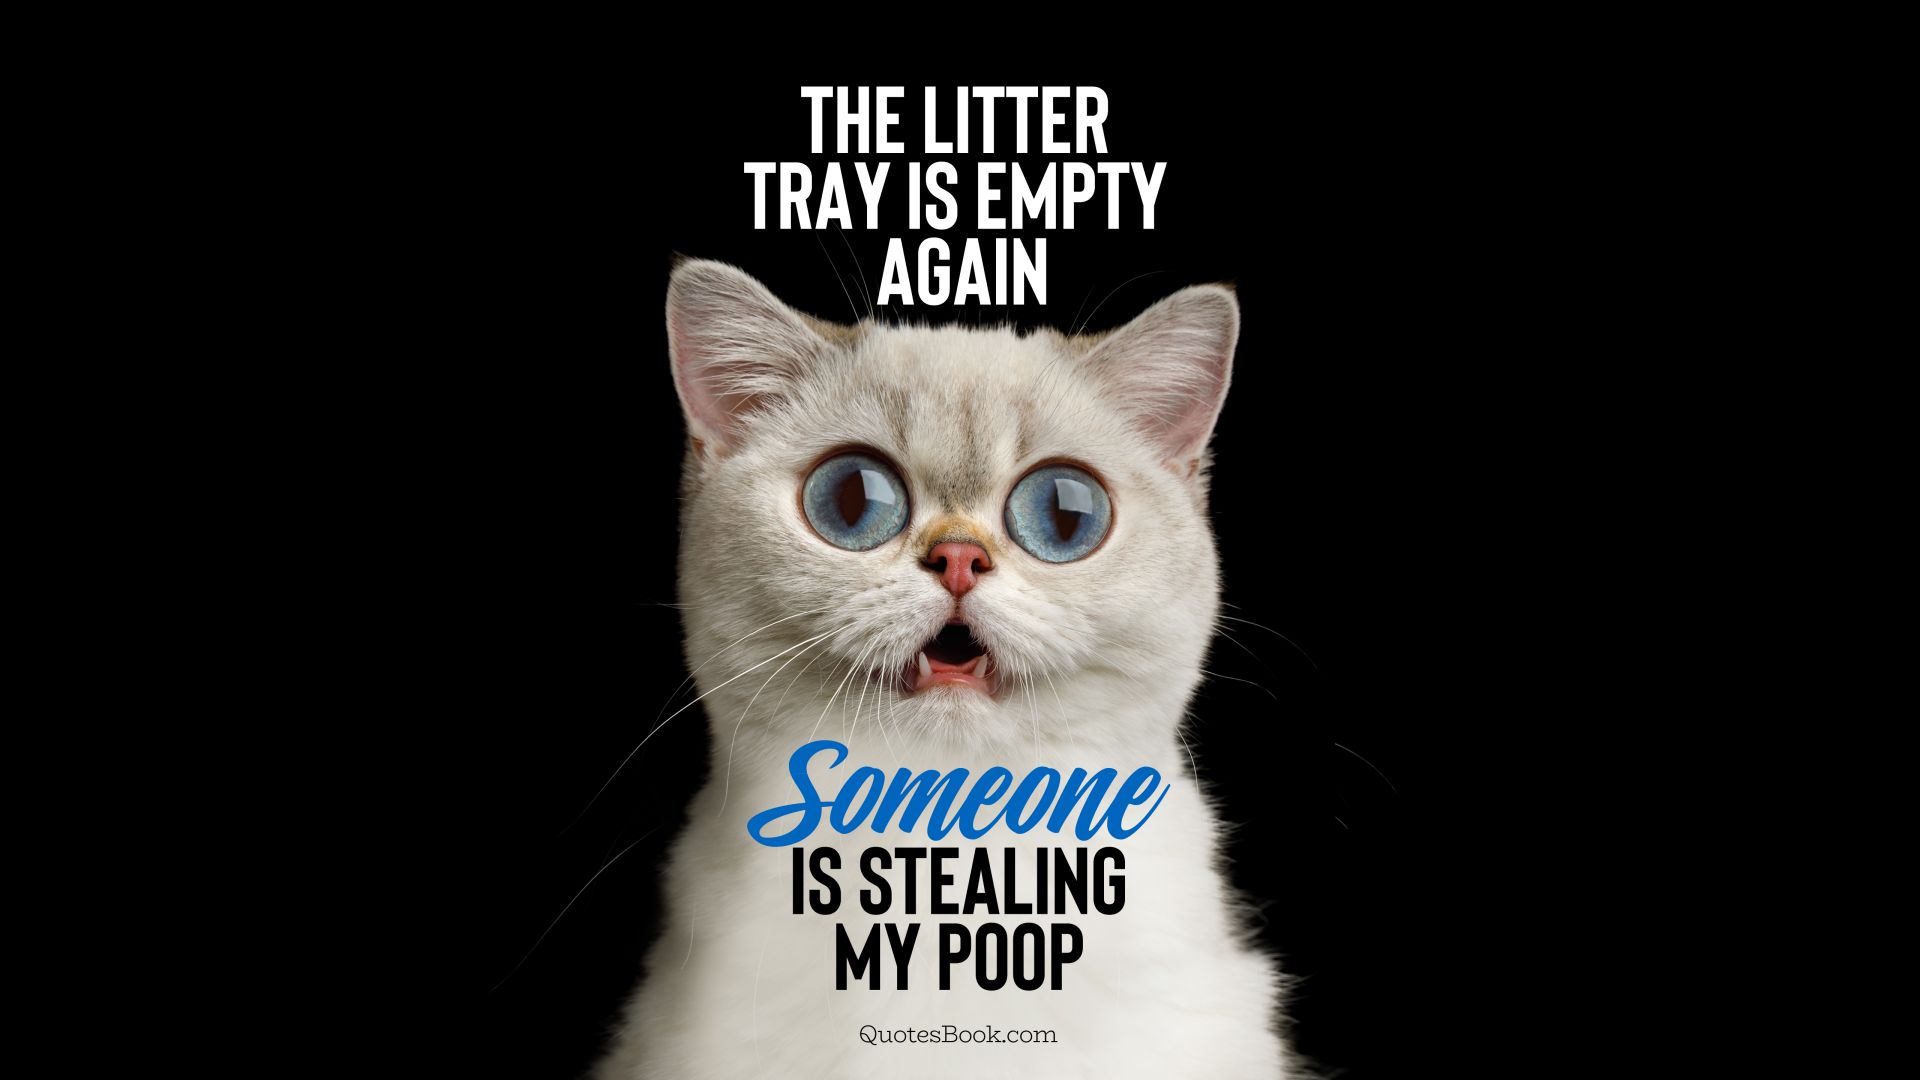 The litter tray is empty again someone is stealing my poop